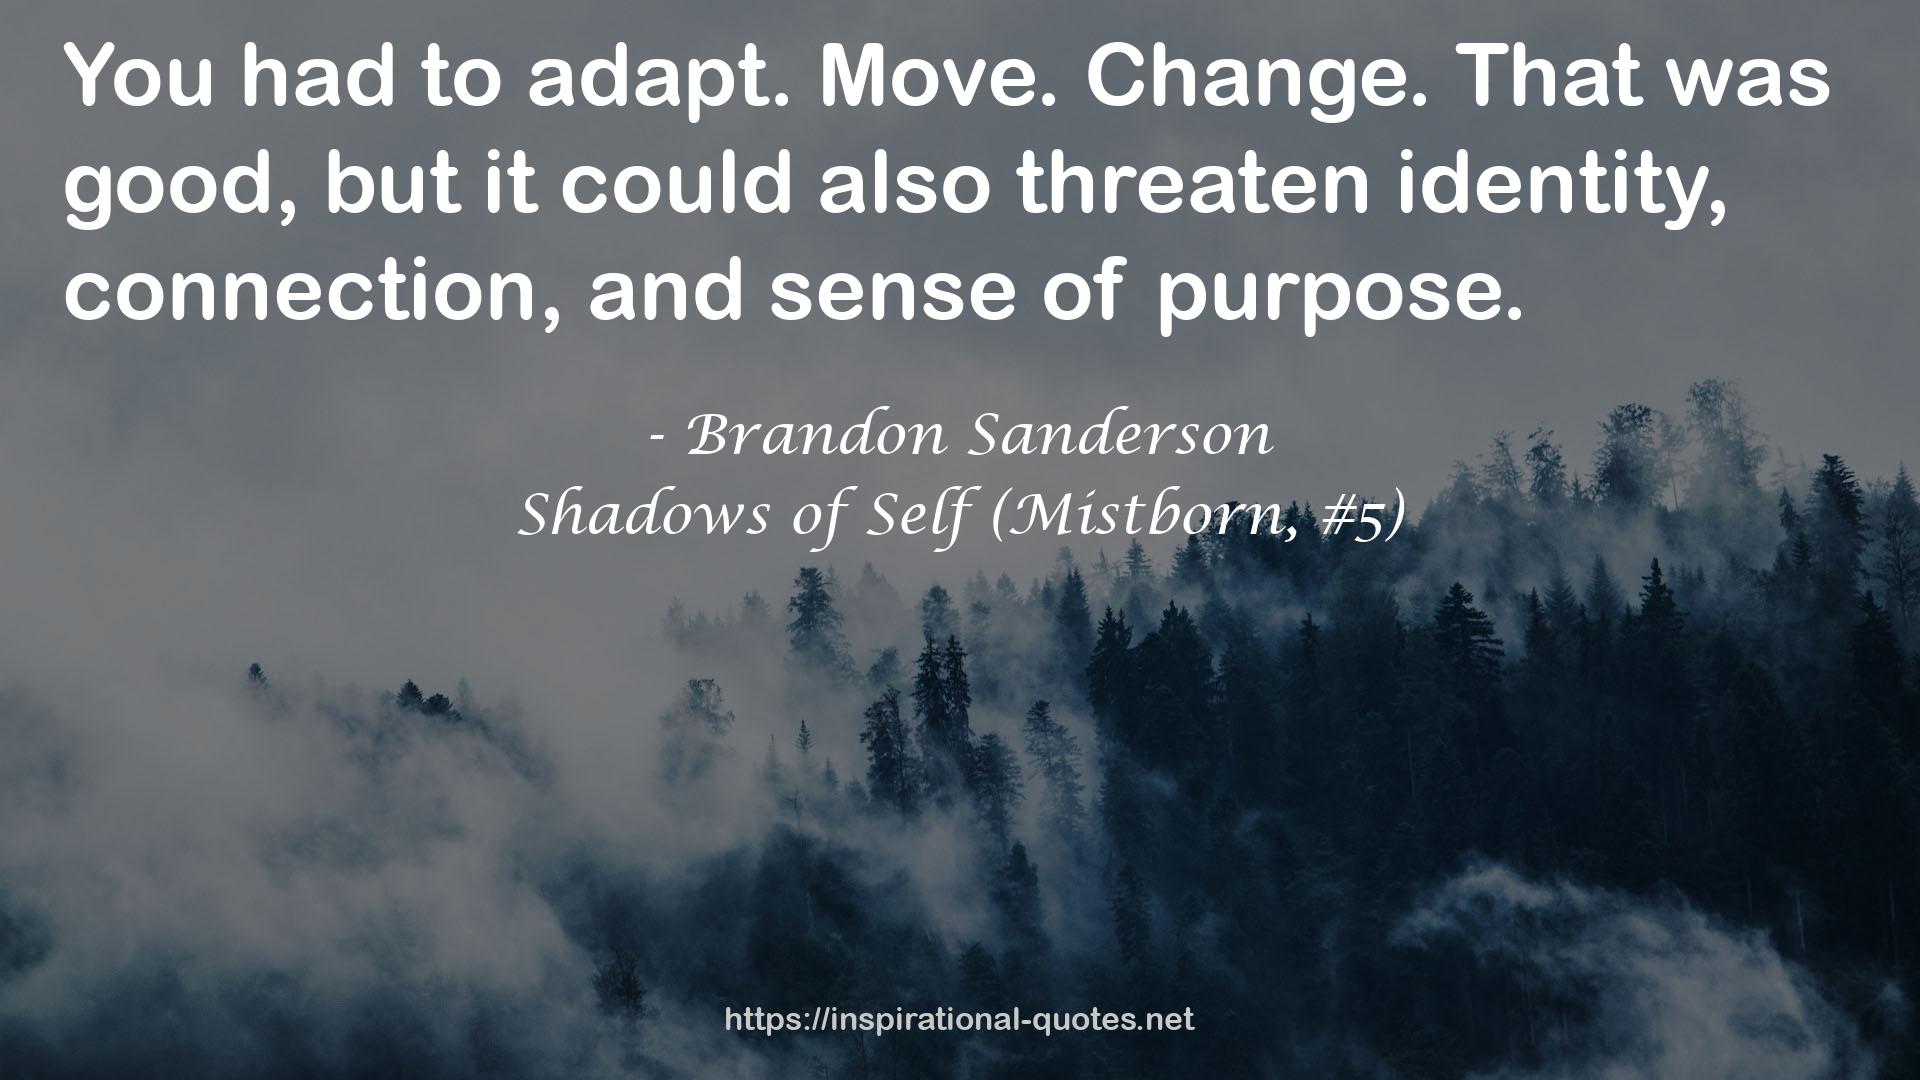 Shadows of Self (Mistborn, #5) QUOTES